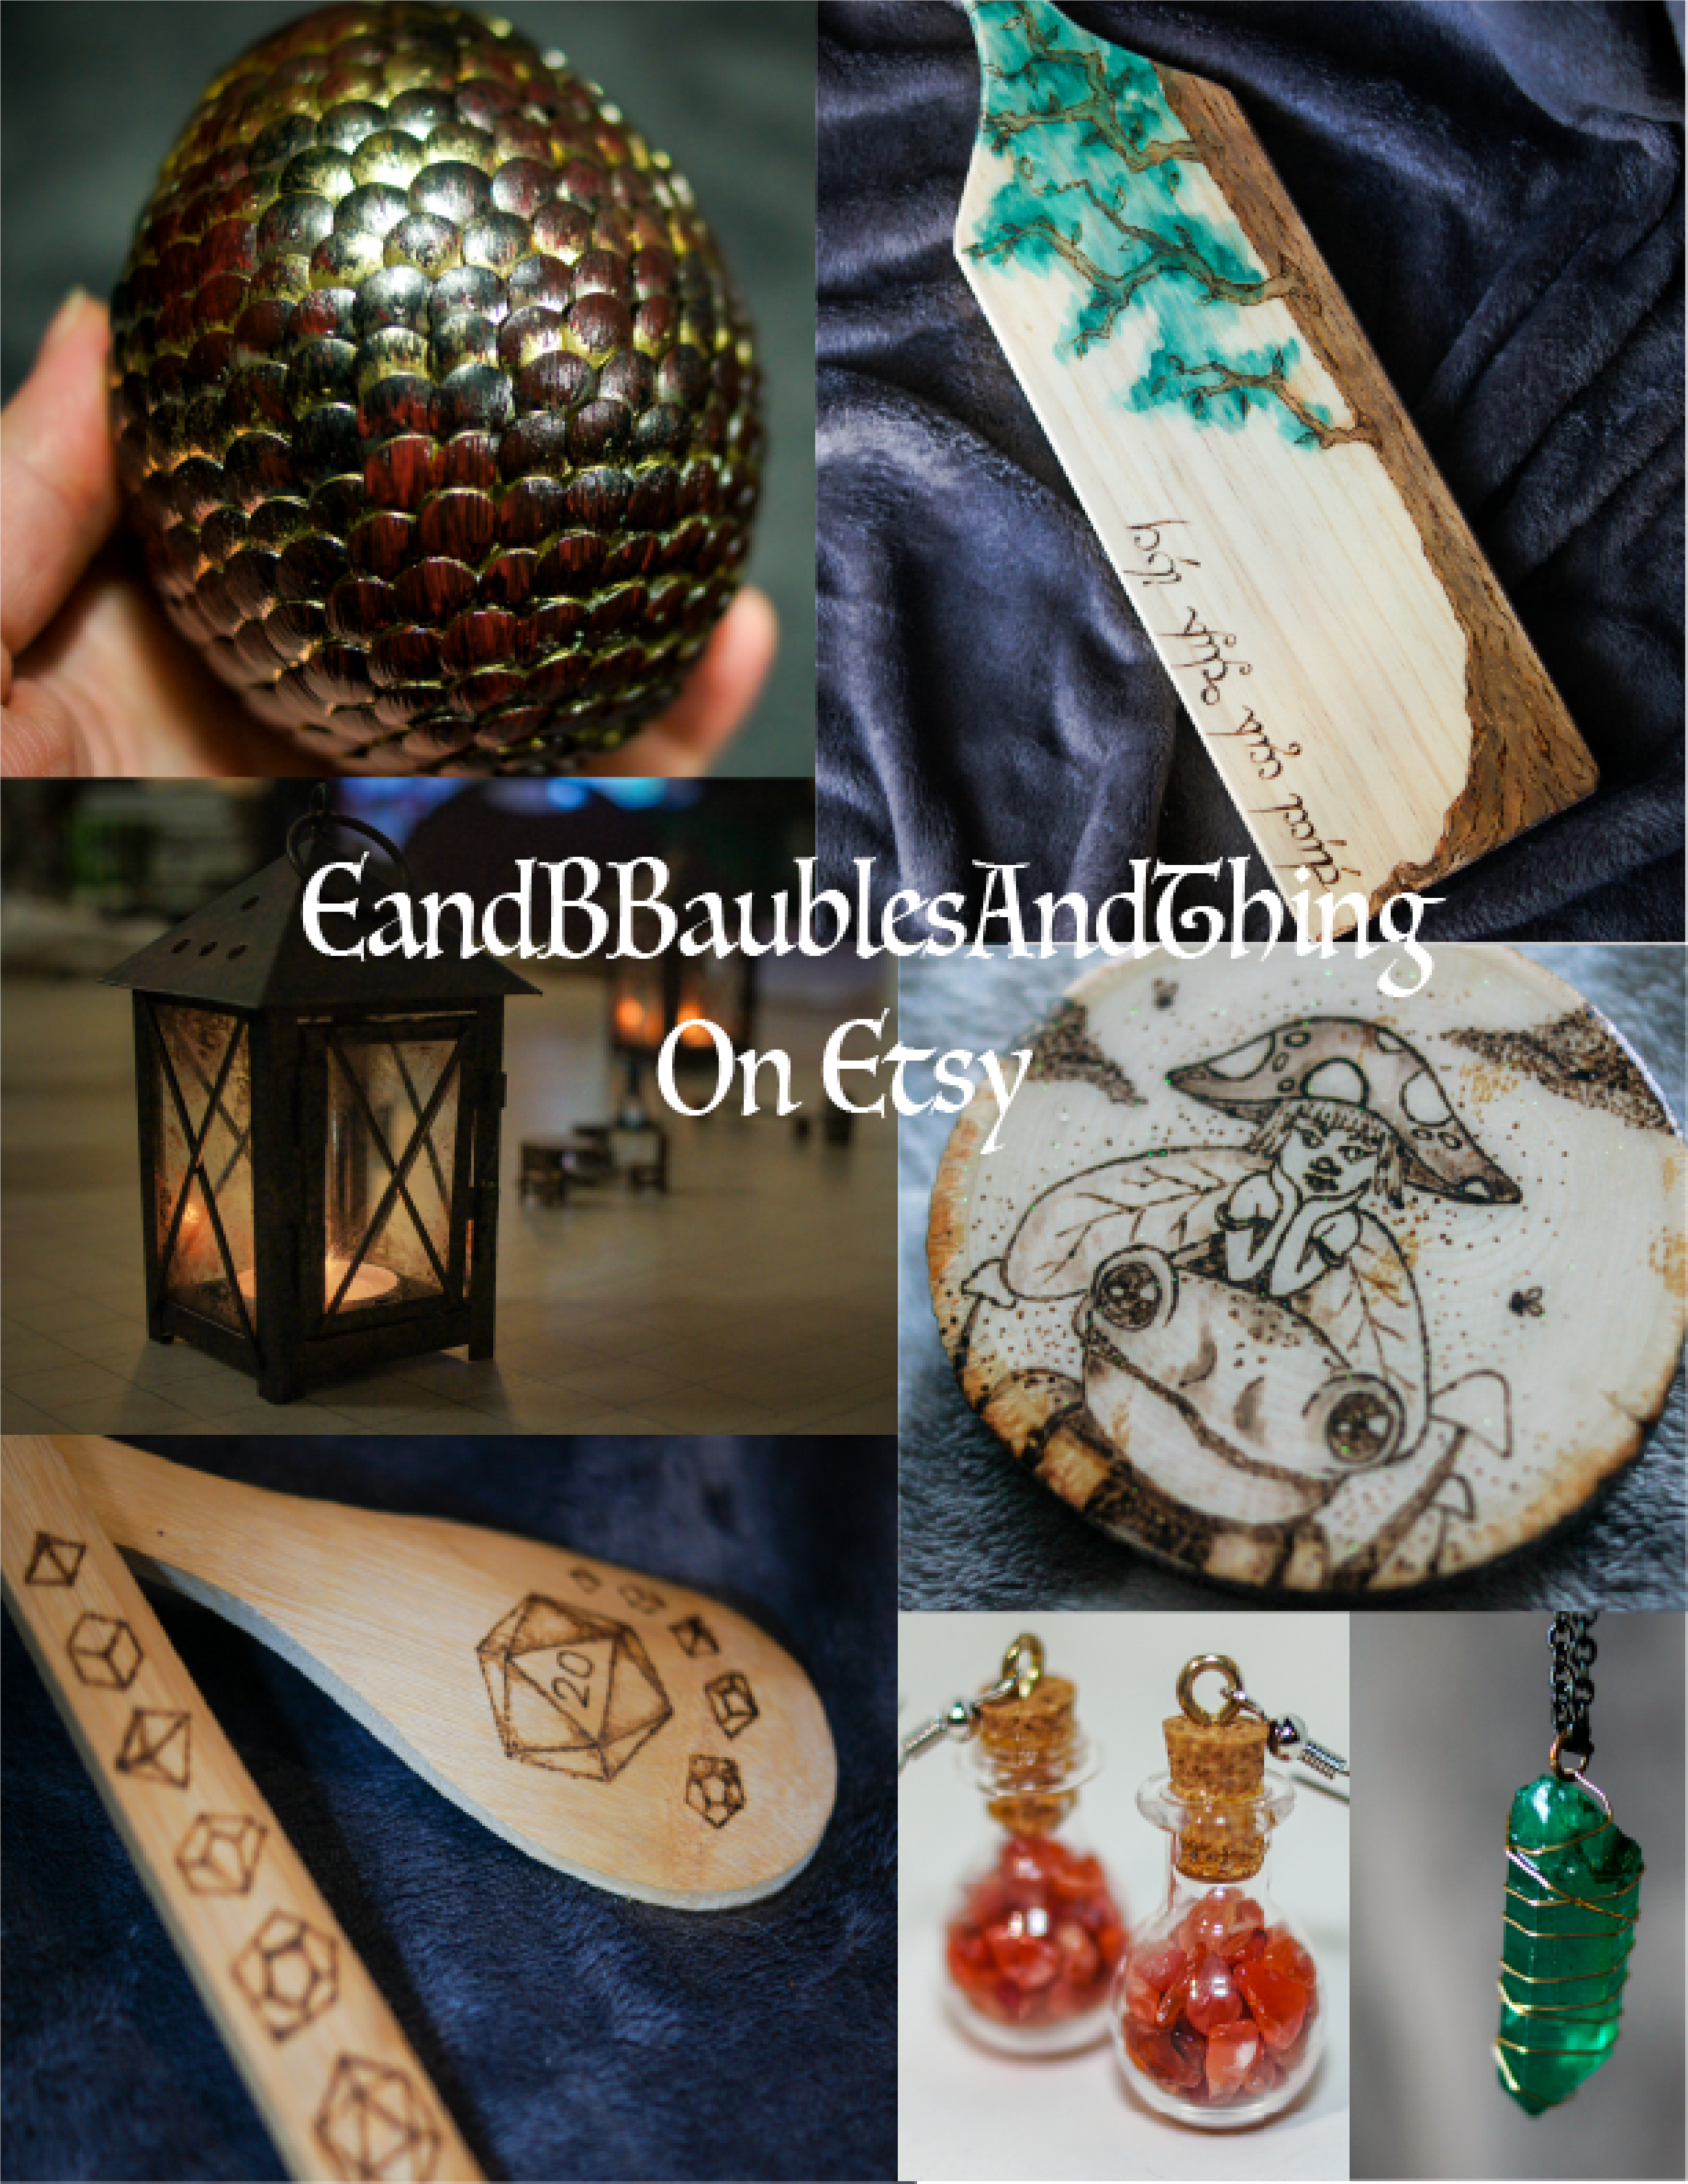 Wood Burning and Much More with EandBBaublesandThings!